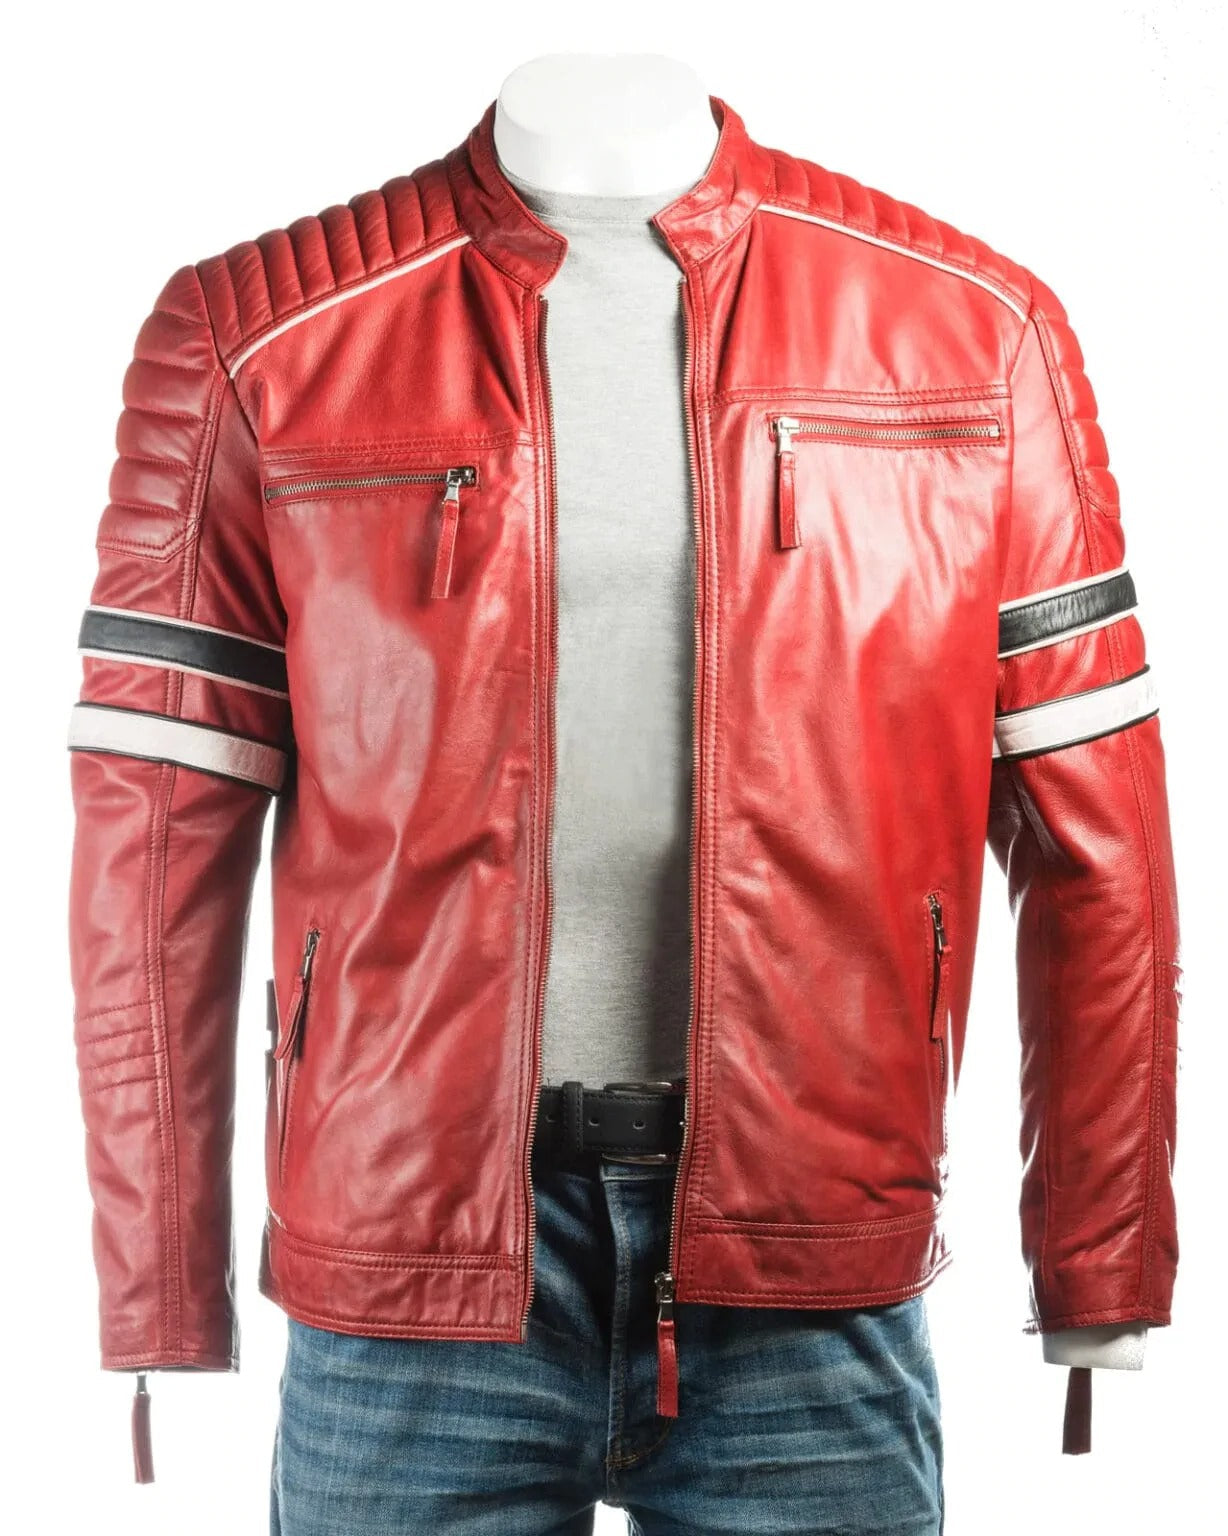 Mens Red Racing Biker Style Leather Jacket